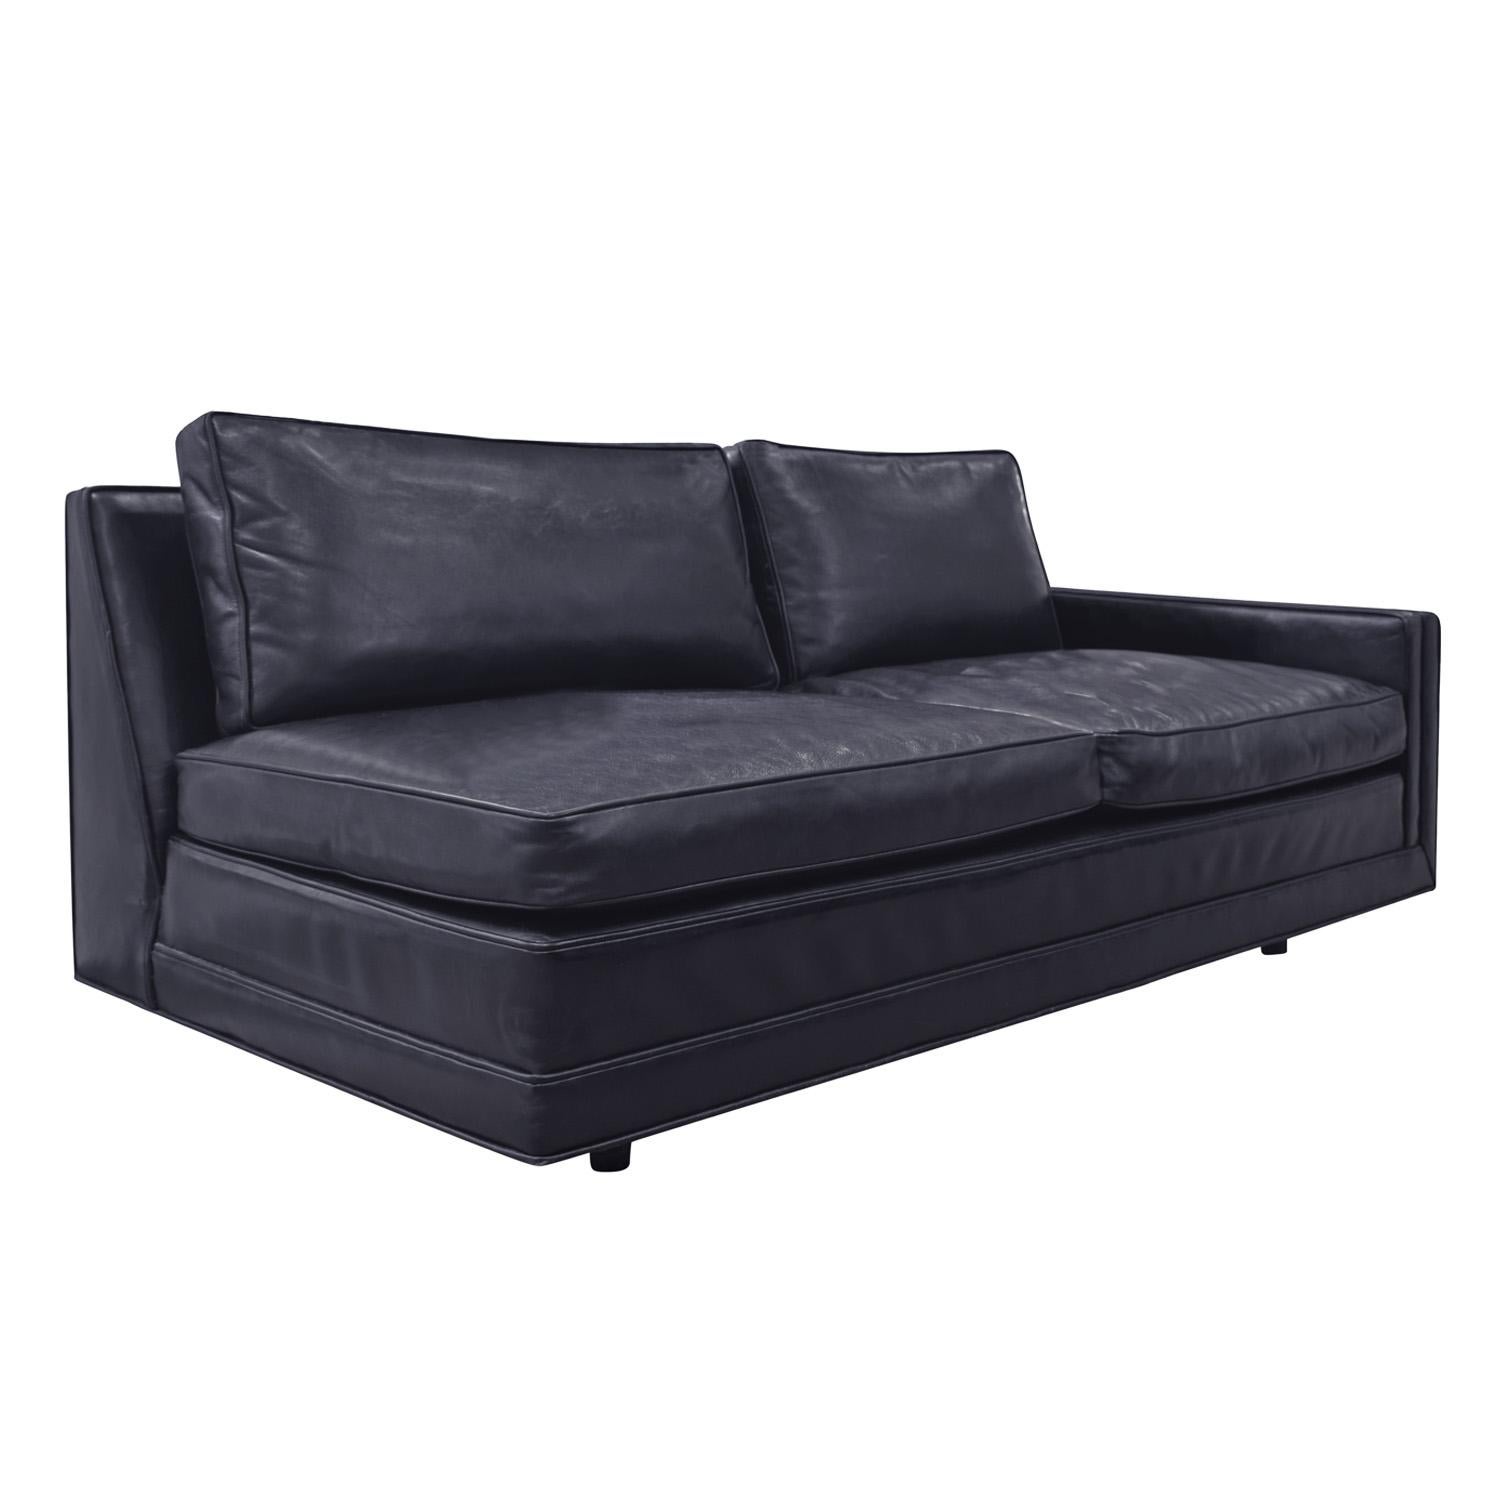 American Harvey Probber Sectional Sofa in Black Leather with Mahogany Legs 1950s 'signed'